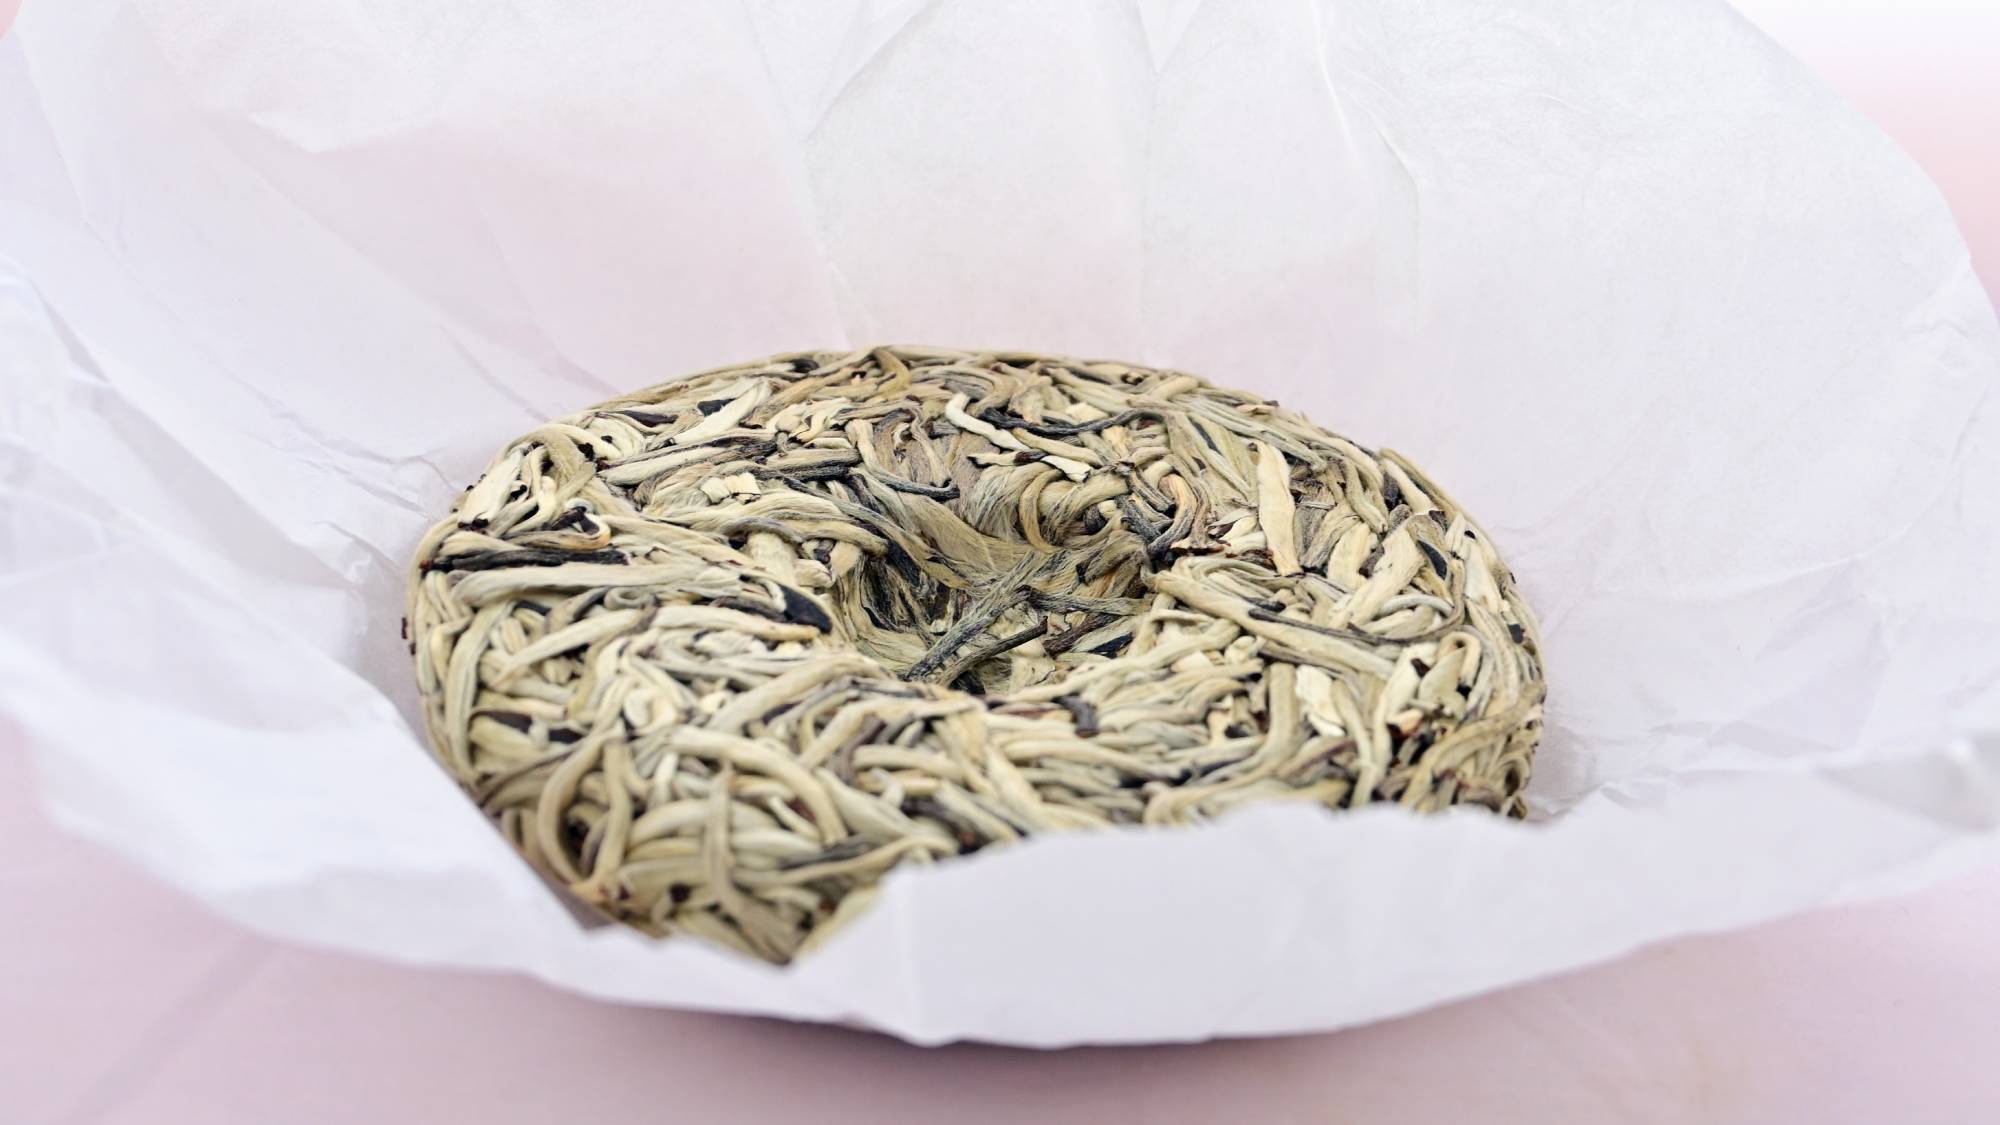 The Yin Zhen Bing Cha disk rests in the middle of its open tissue paper wrapper. The leaves are all white with a creamy golden sheen, and have been pressed together into a circle with a spherical cut out in the center.